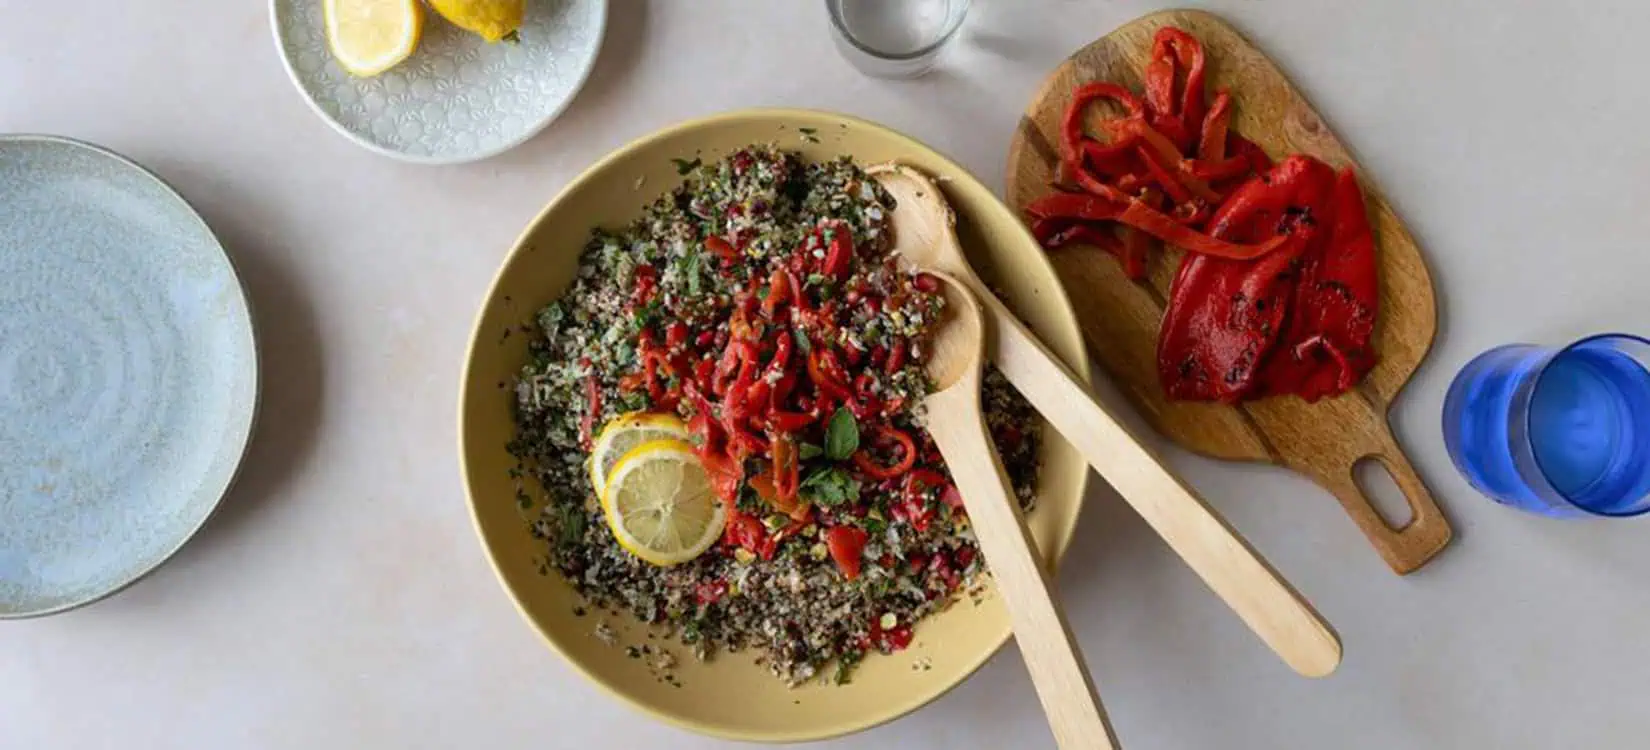 Cauliflower Quinoa Tabbouleh Salad with Roasted Red Peppers